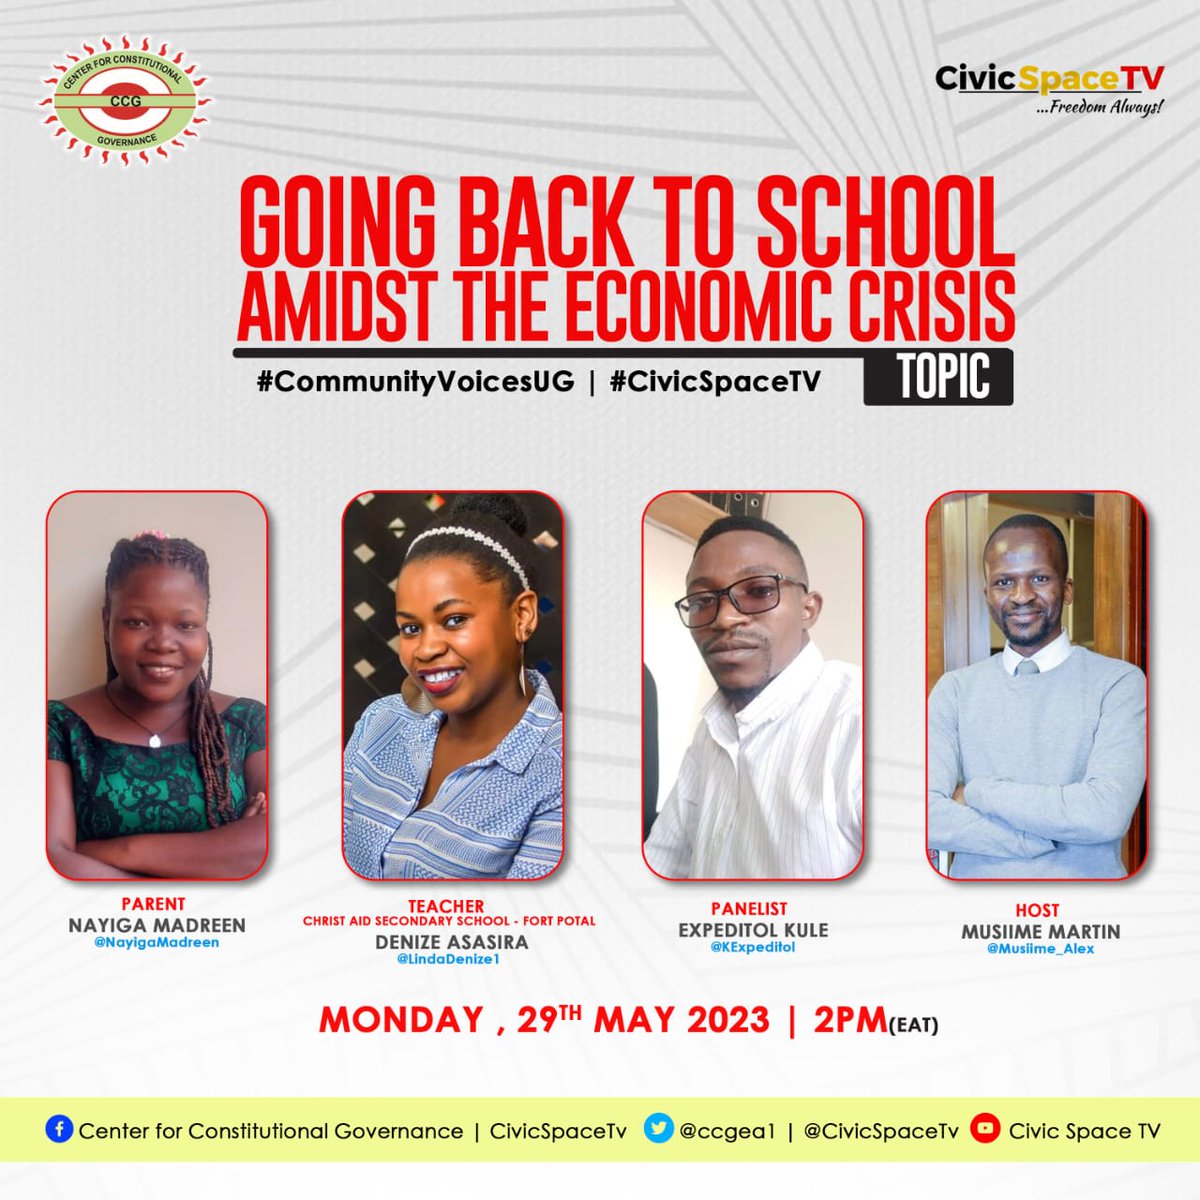 WATCH #CommunityVoicesUG on #CivicSpaceTV about going #BackToSchool amidst the economic Crisis. 

Link:youtu.be/OWVy-8JVlPM